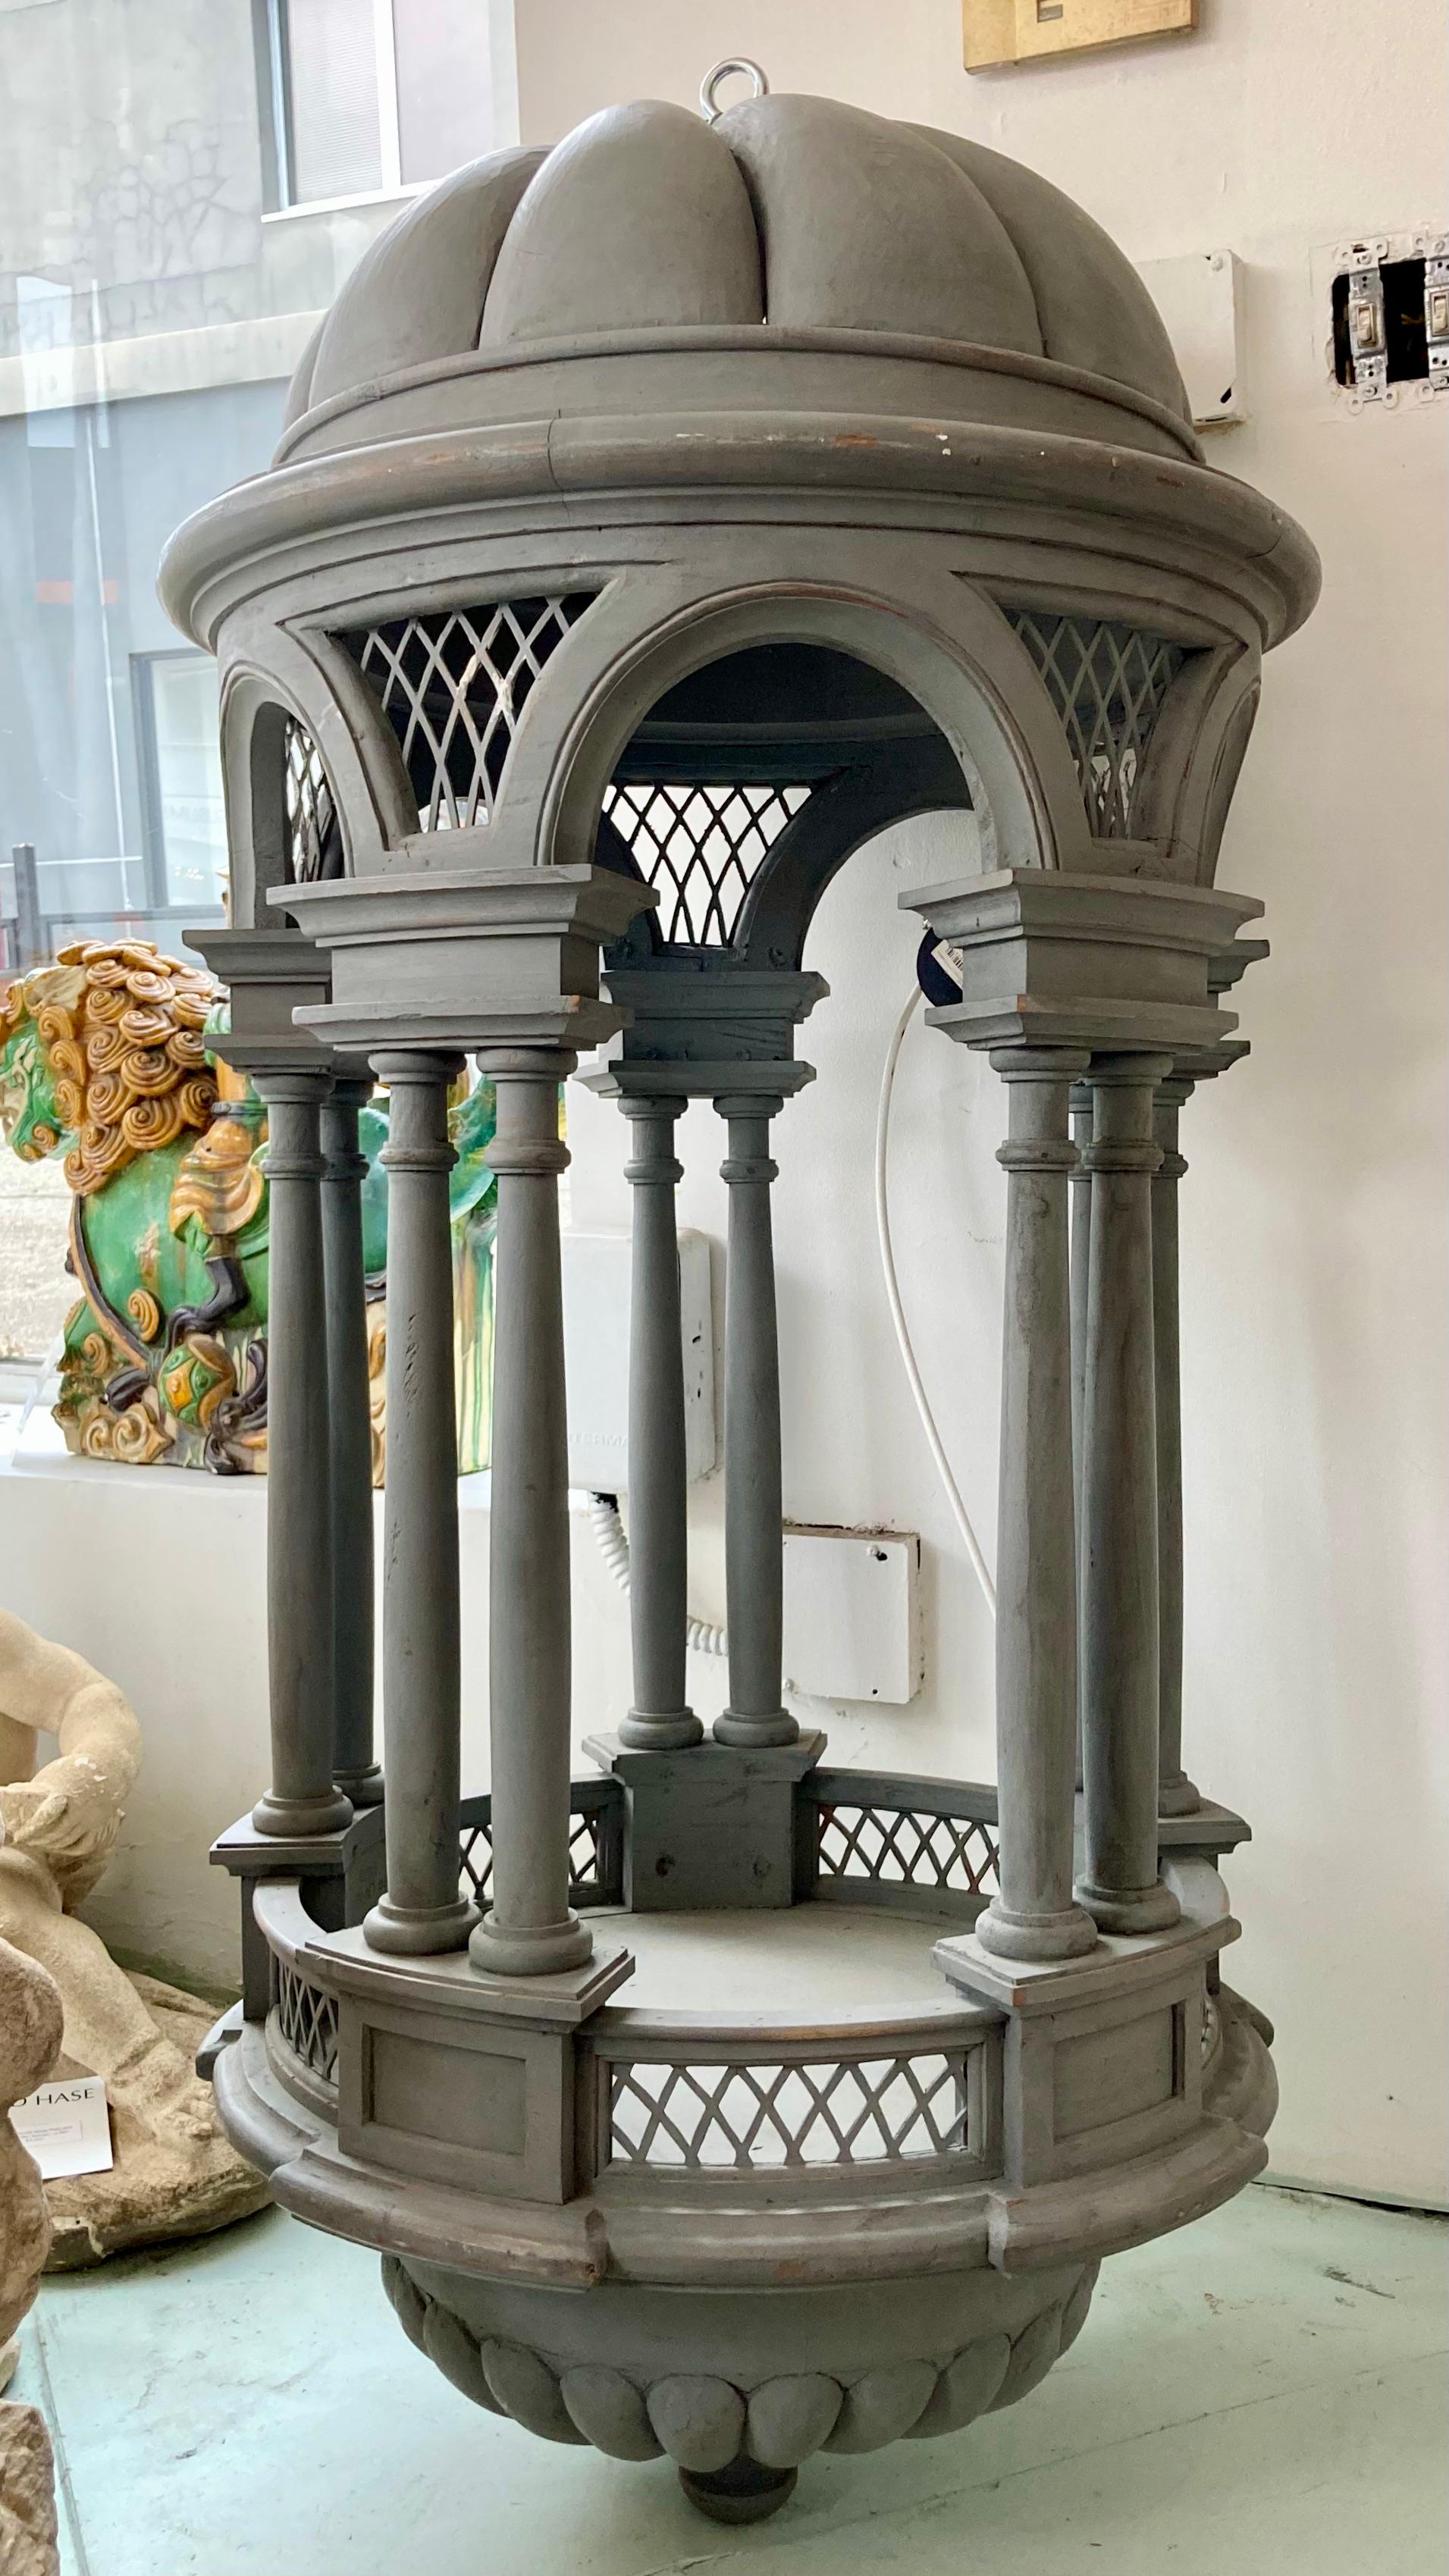 Beautiful French palace size carved wood architectural lantern. This is not currently electrified you will need your electrician to install. Extremely large scale and incredible woodworking details. Original painted finish with some touch up needed